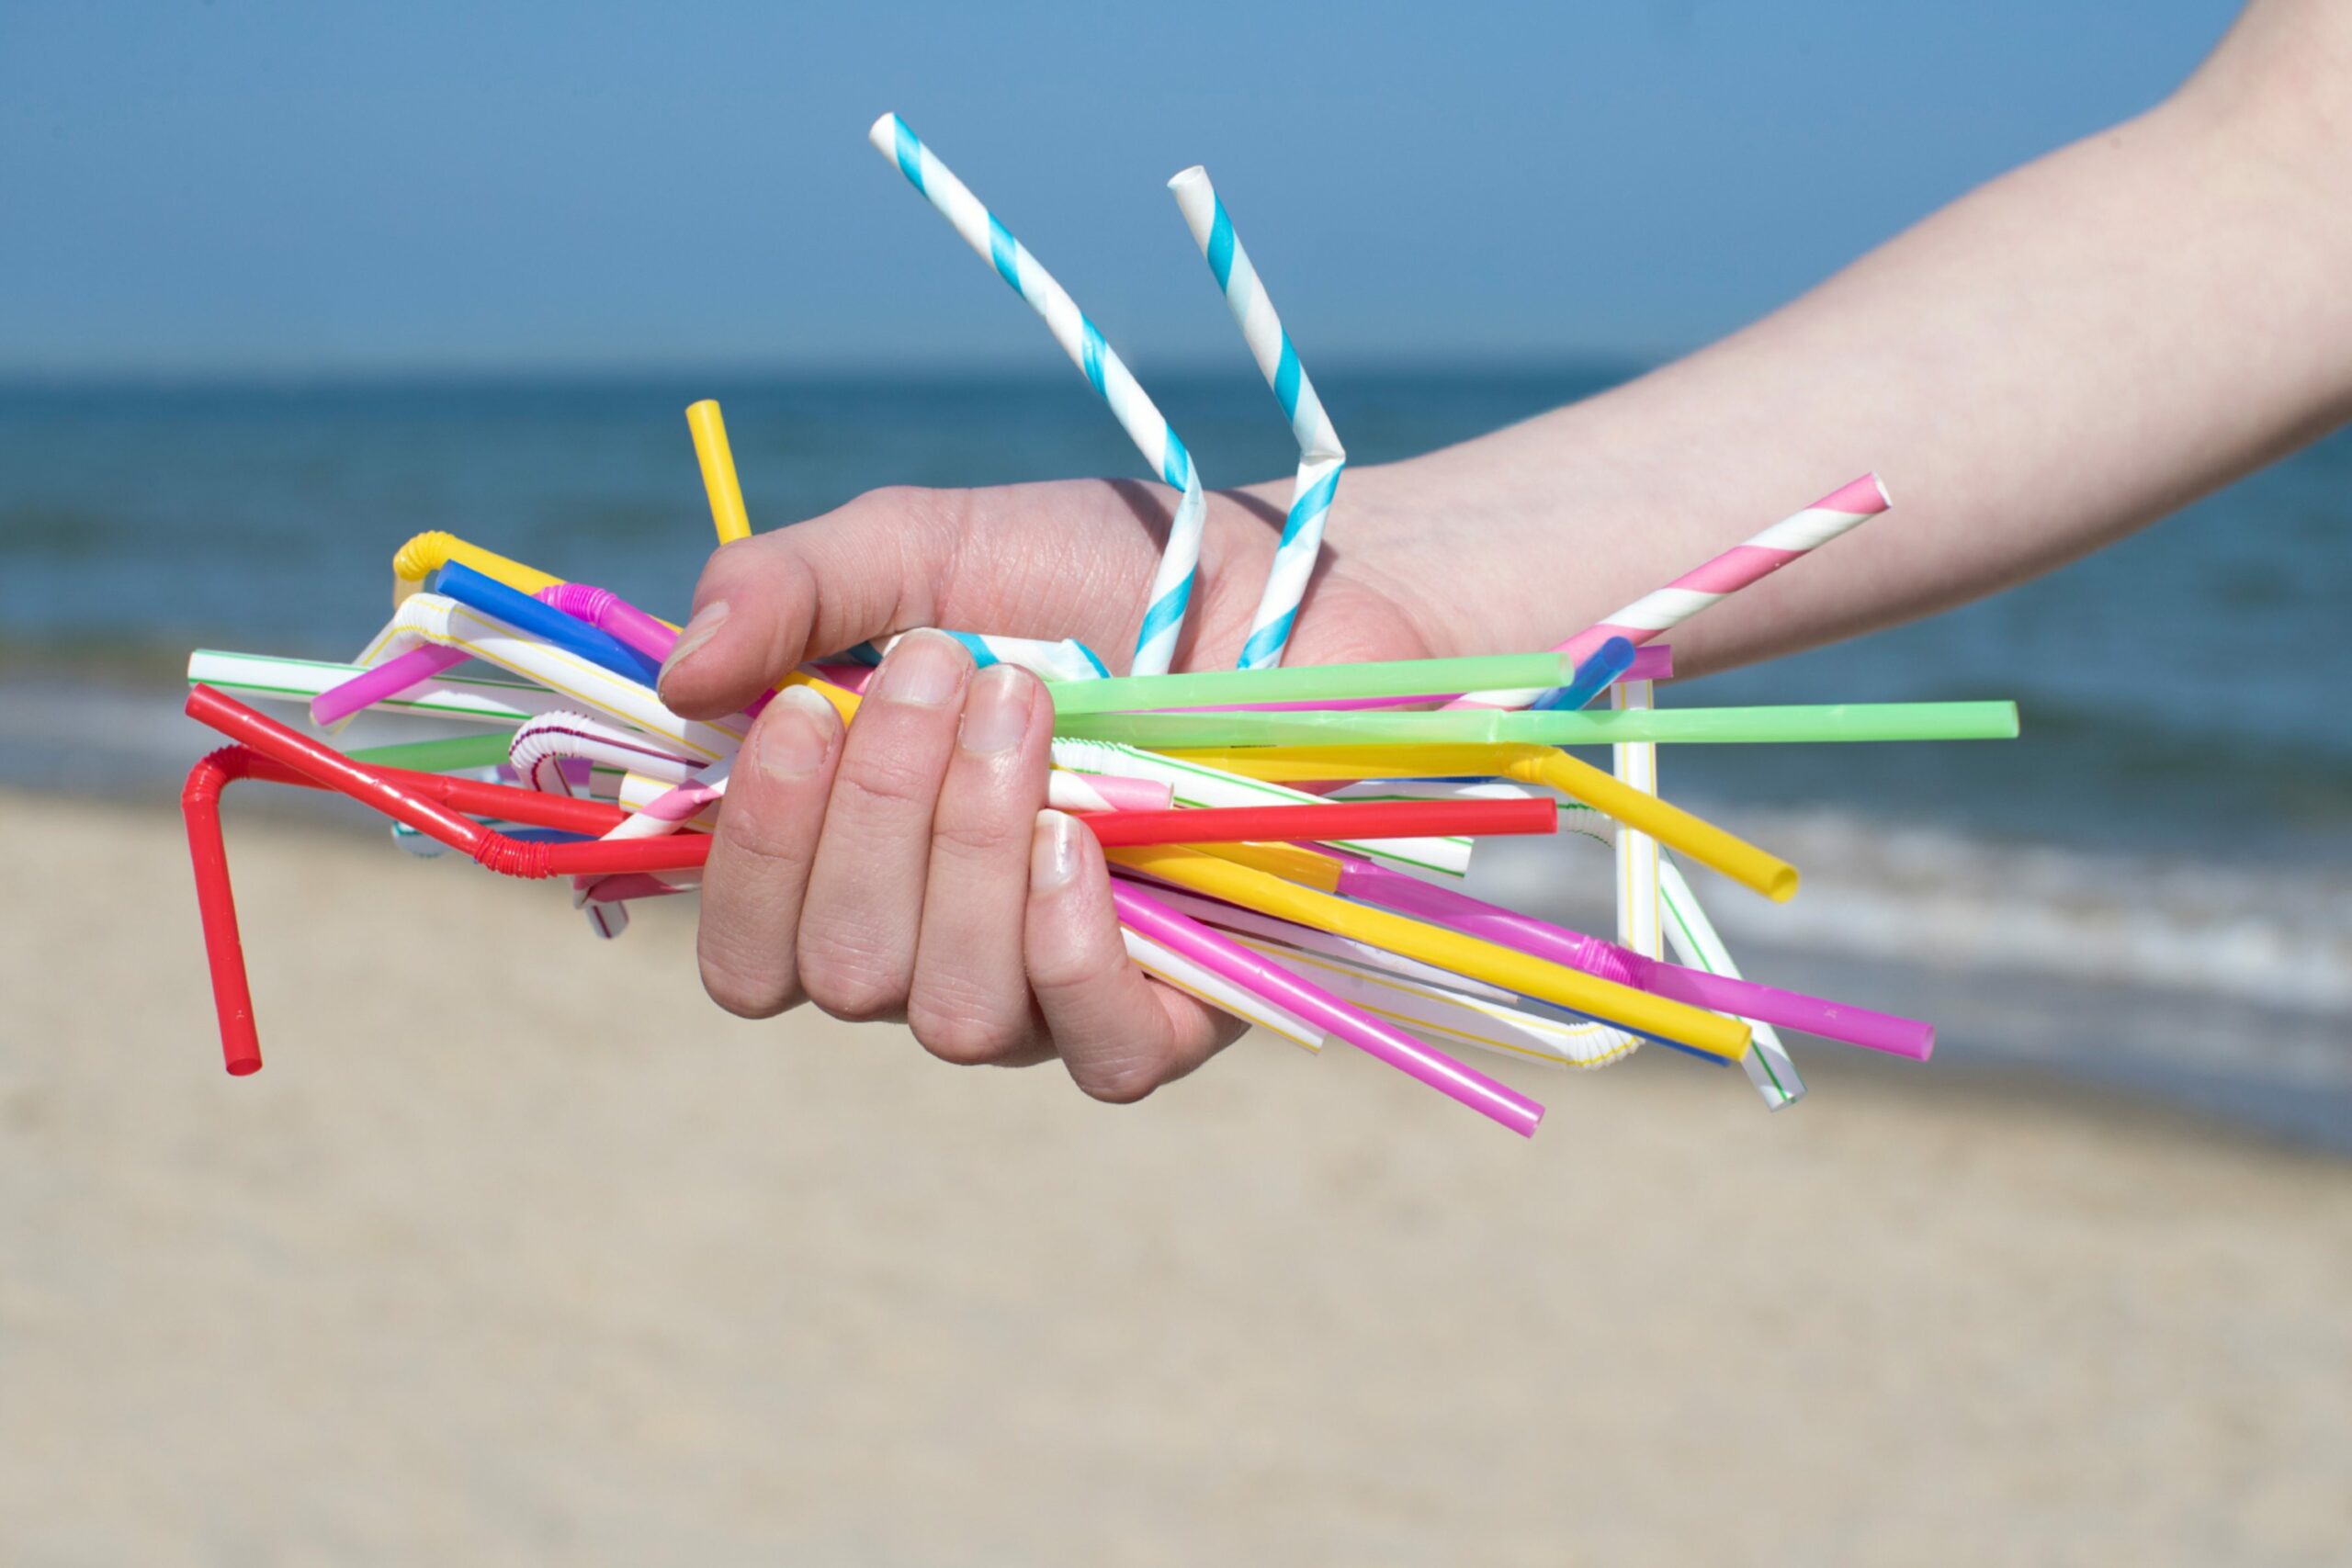 plastic straws are banned in scotland from june 1